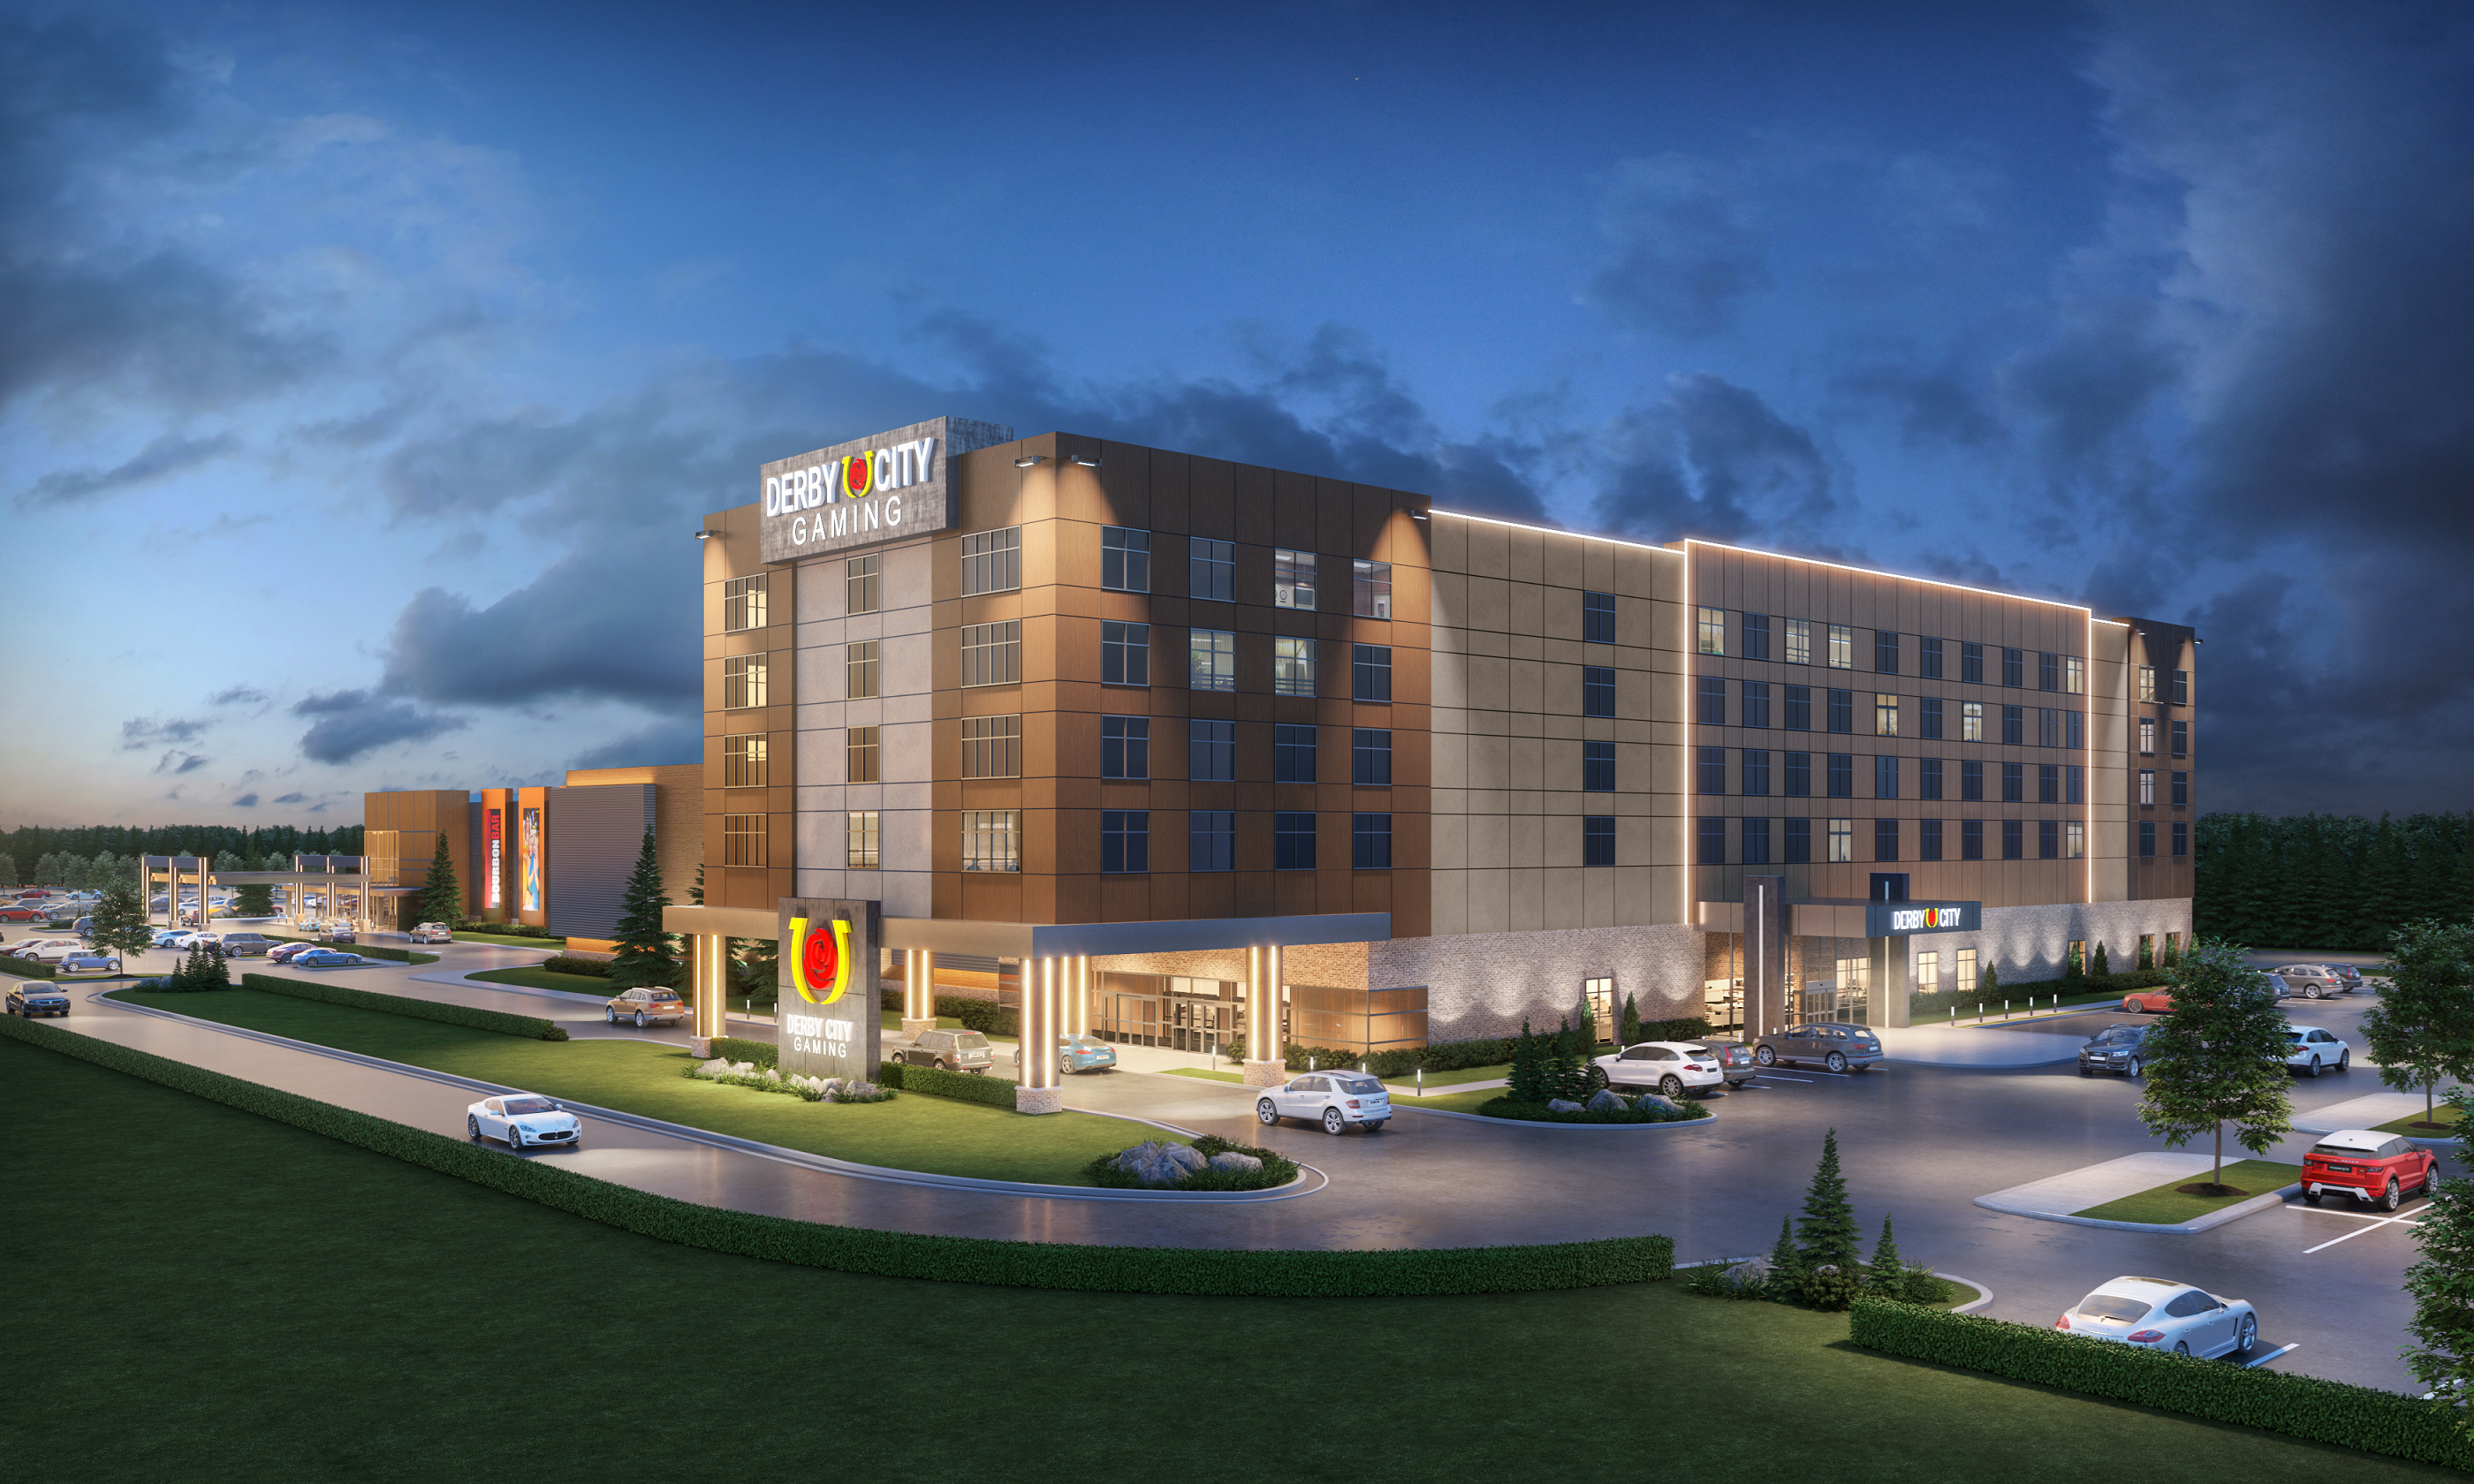 The Derby City Gaming expansion will include a five-story hotel.